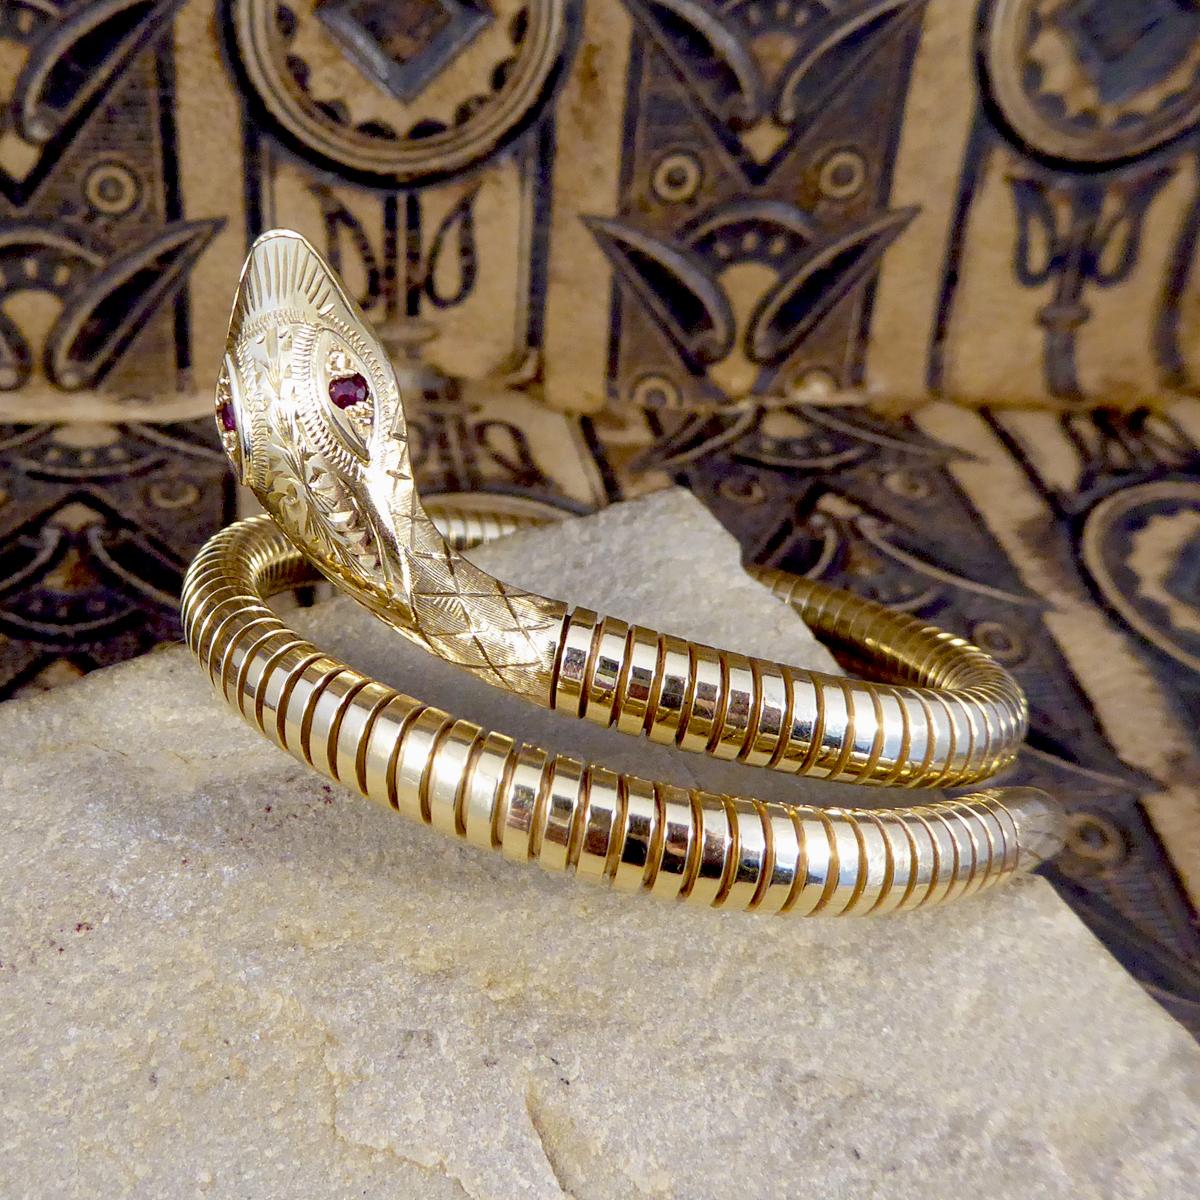 This vintage snake bracelet features two ruby stones for eyes and is very flexible for ease when taking on and off. The snake used in jewellery symbolises eternity and wisdom as the Queen pronounces the snake to be a figure of eternal love in the